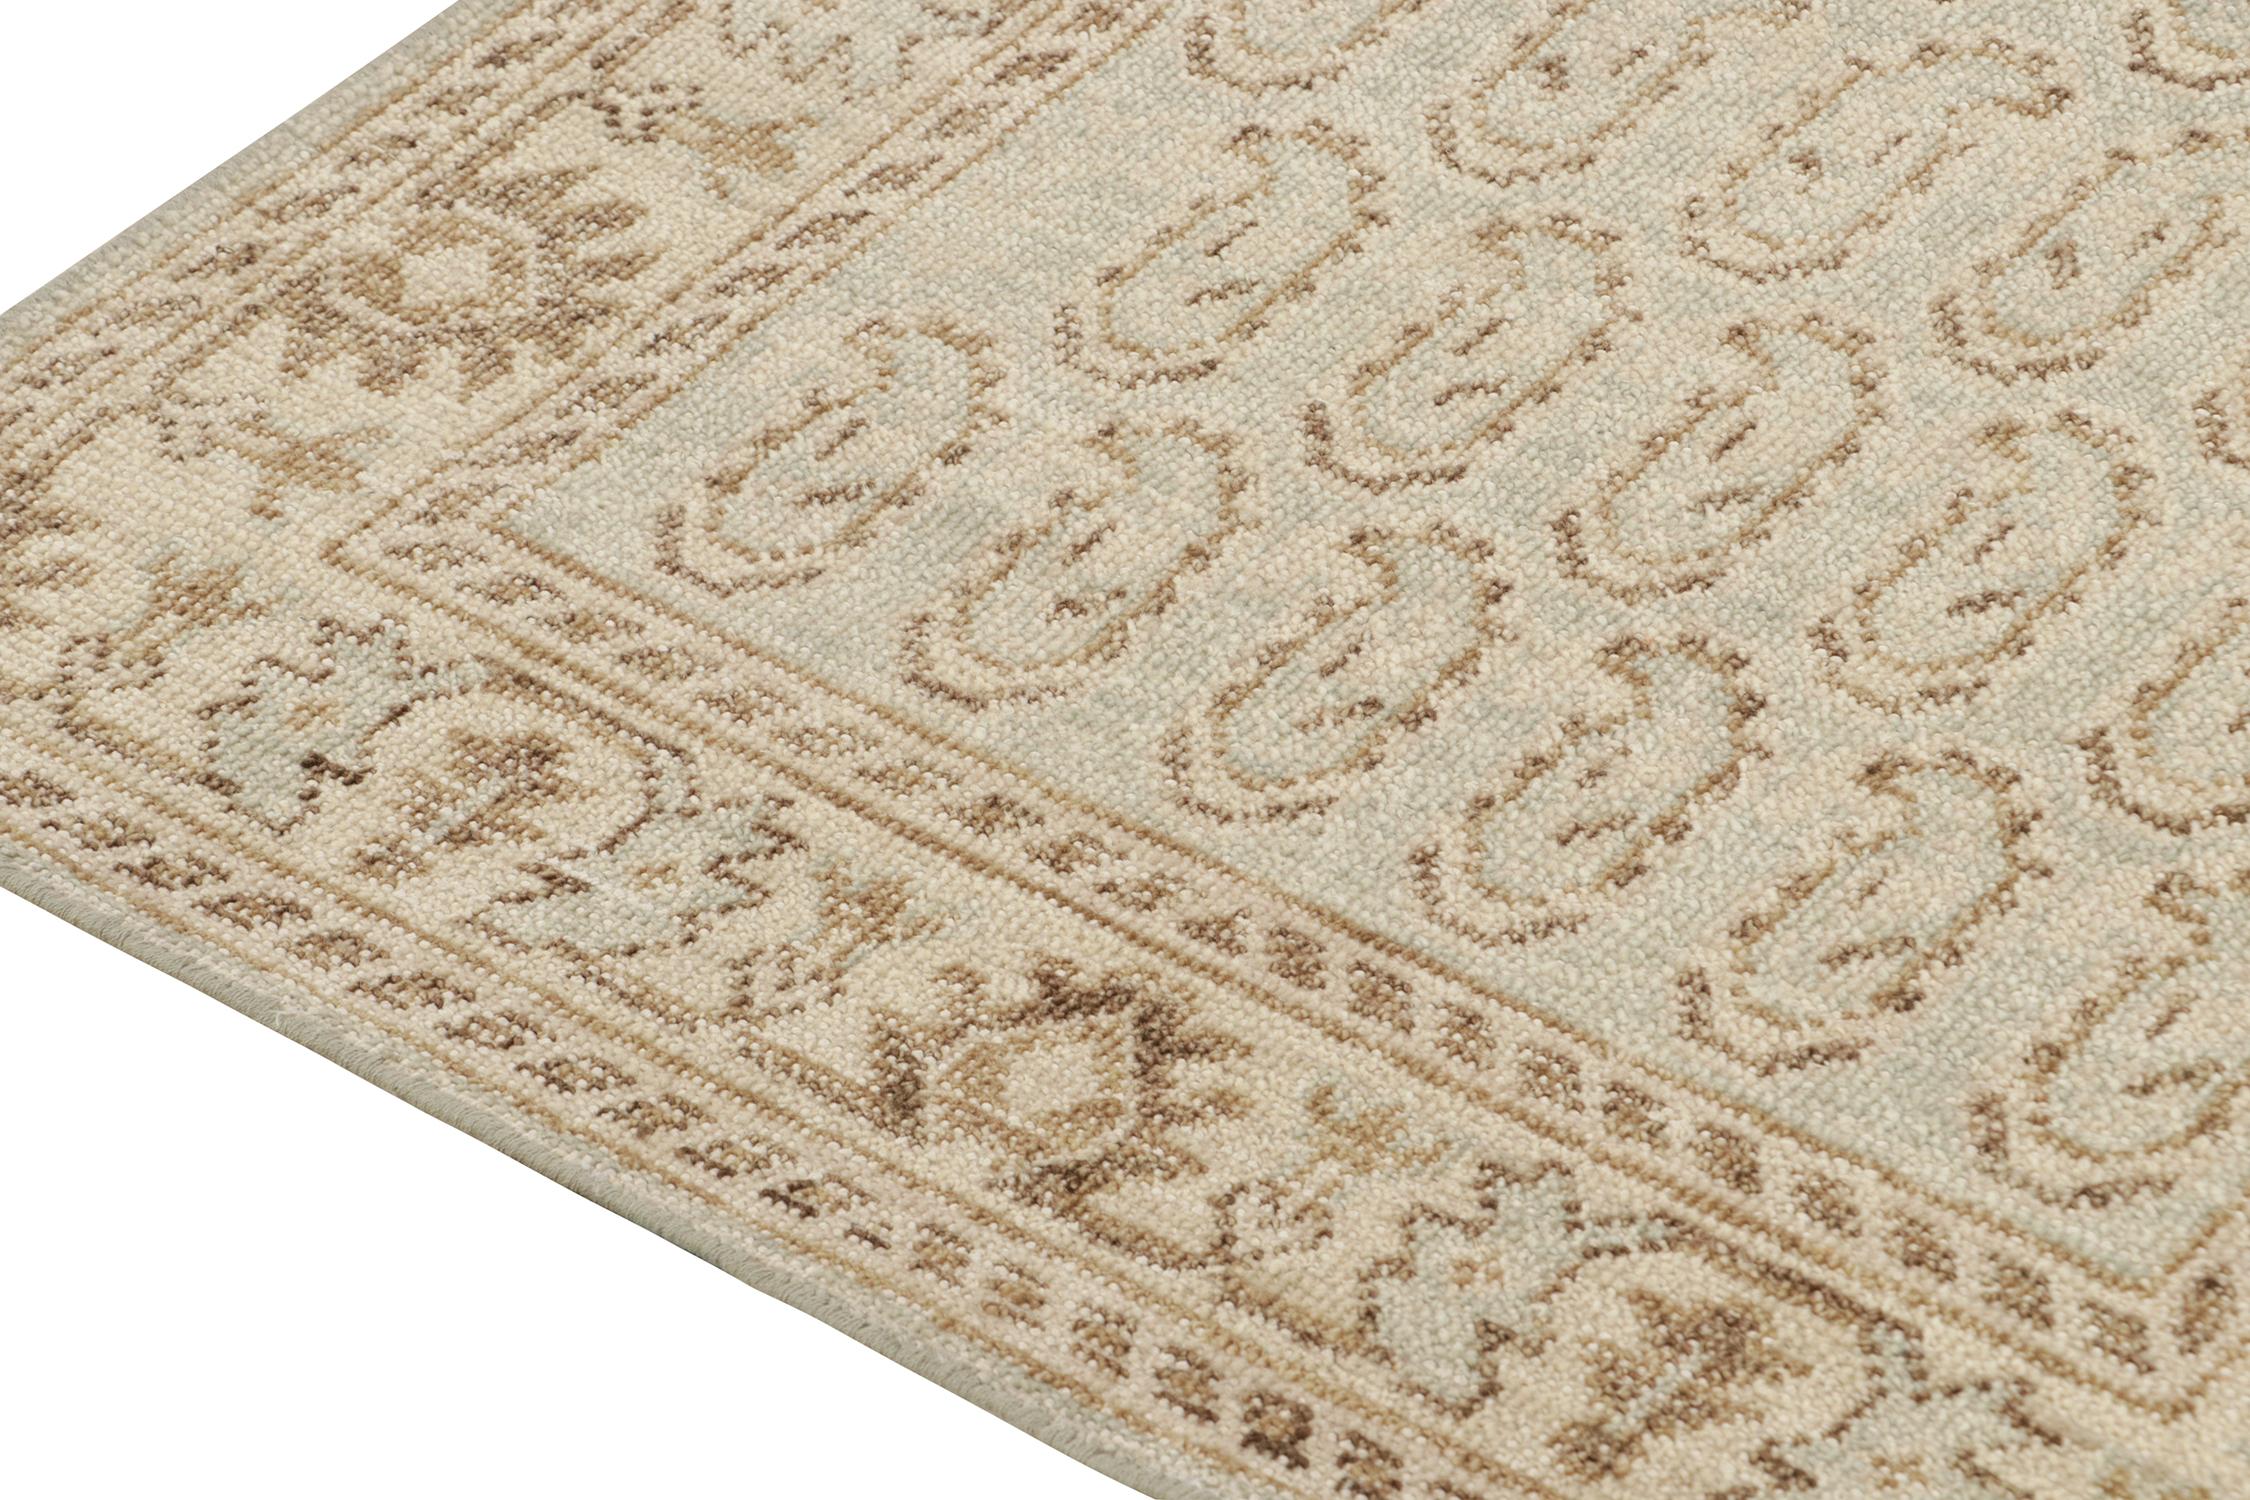 Hand-Knotted Rug & Kilim’stribal Style Rug in Blue with Beige-Brown Paisley Patterns For Sale